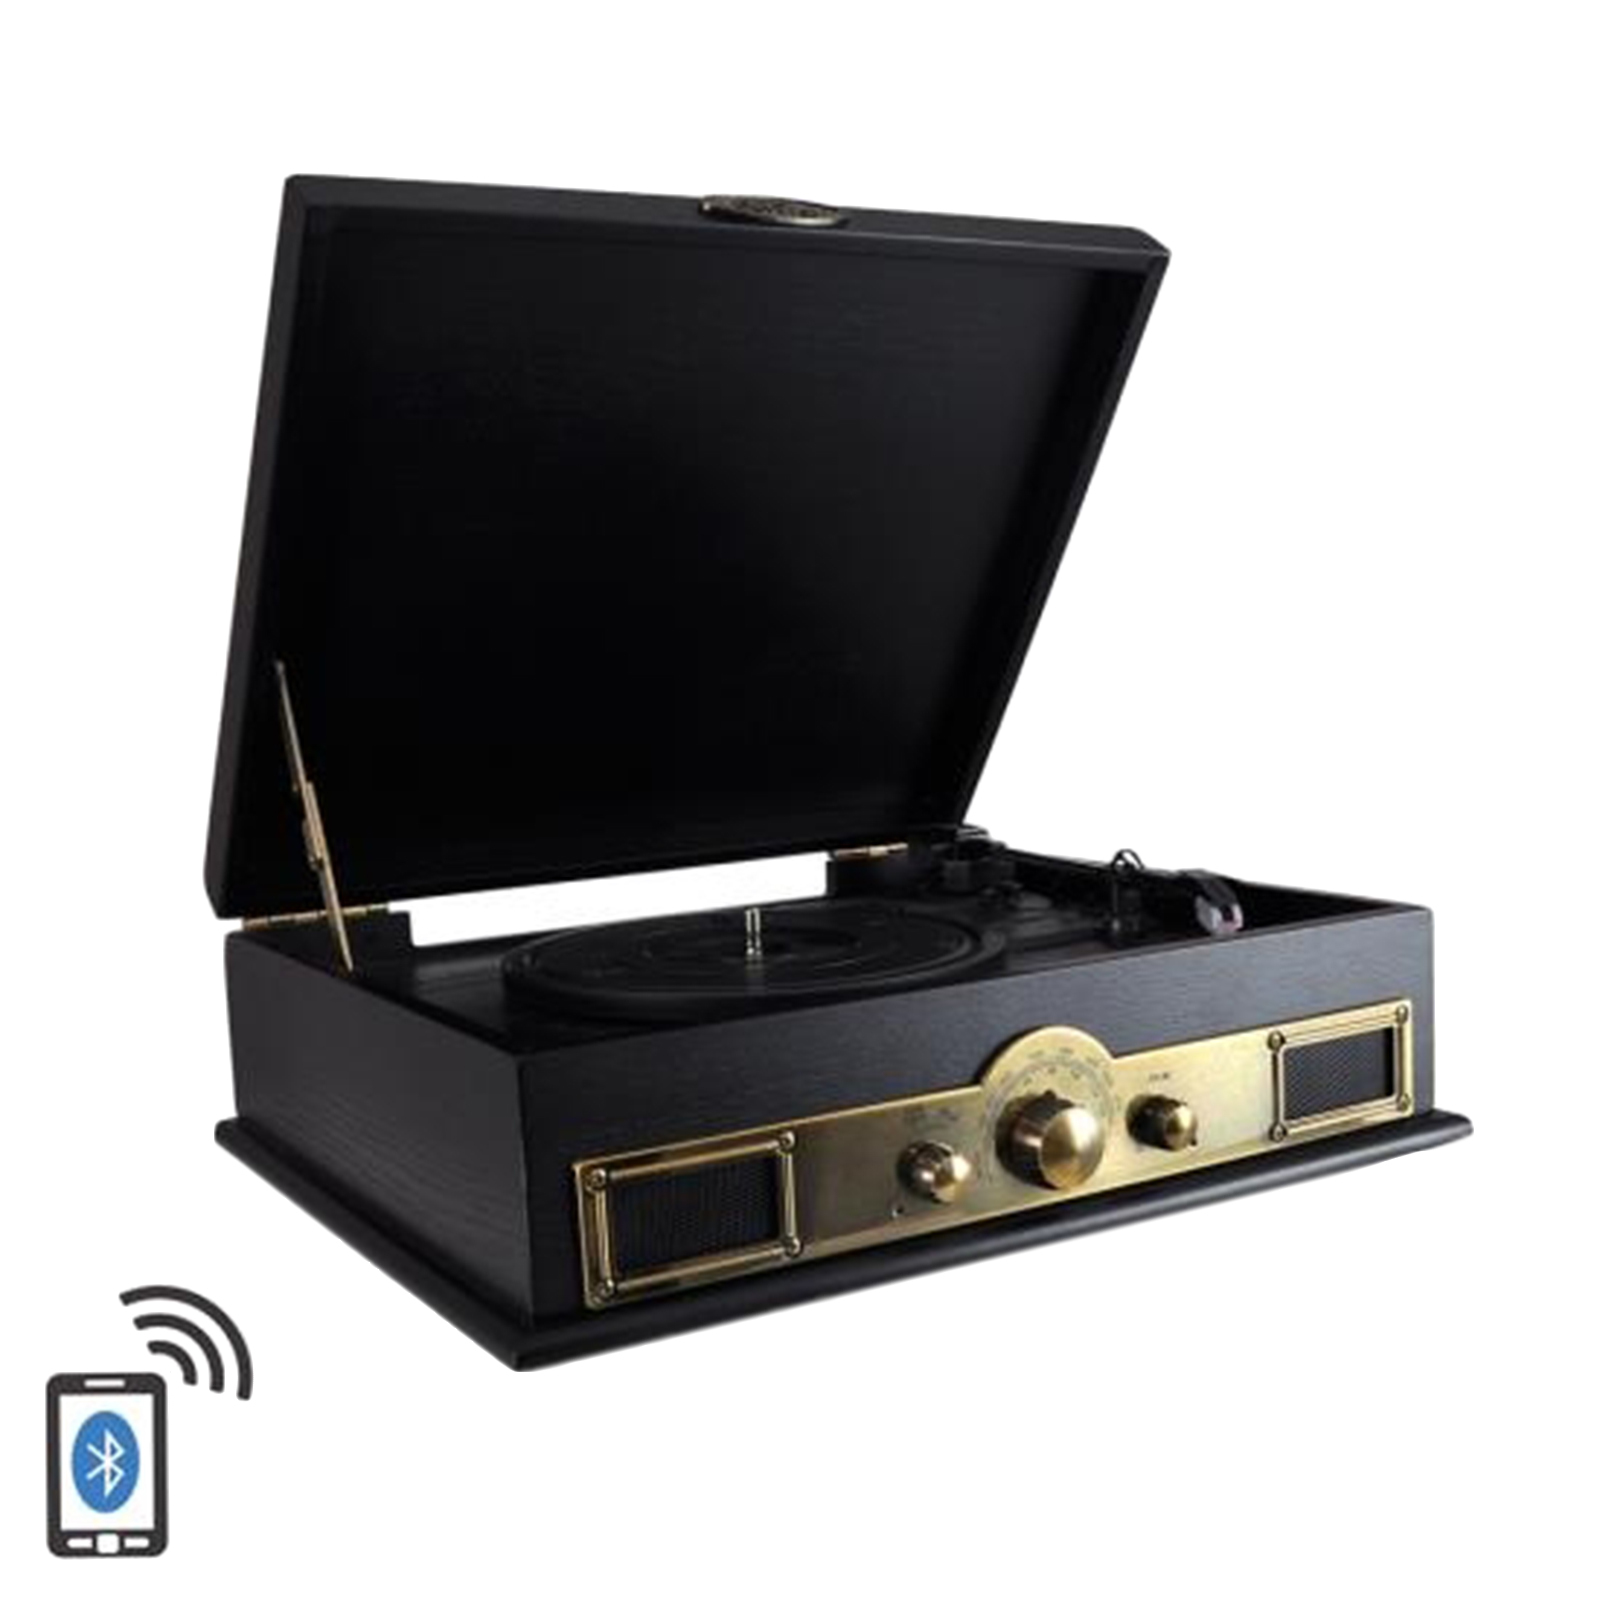 Retro Vintage Classic Style BT Turntable Vinyl Record Player with Recording Ability, AM/FM Radio - image 1 of 1